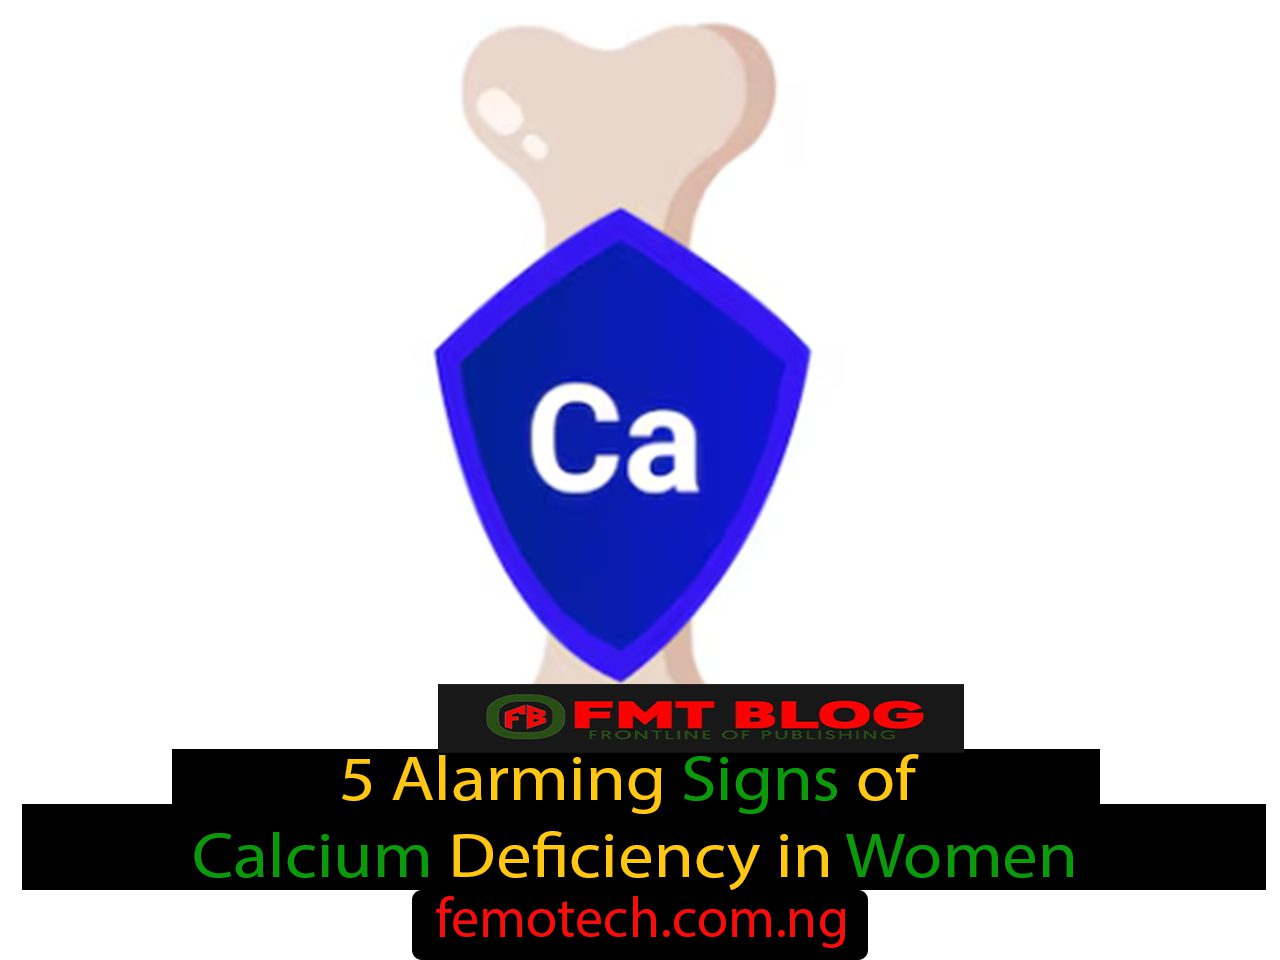 5 Alarming Signs of Calcium Deficiency in Women: Don’t Ignore These Warnings!